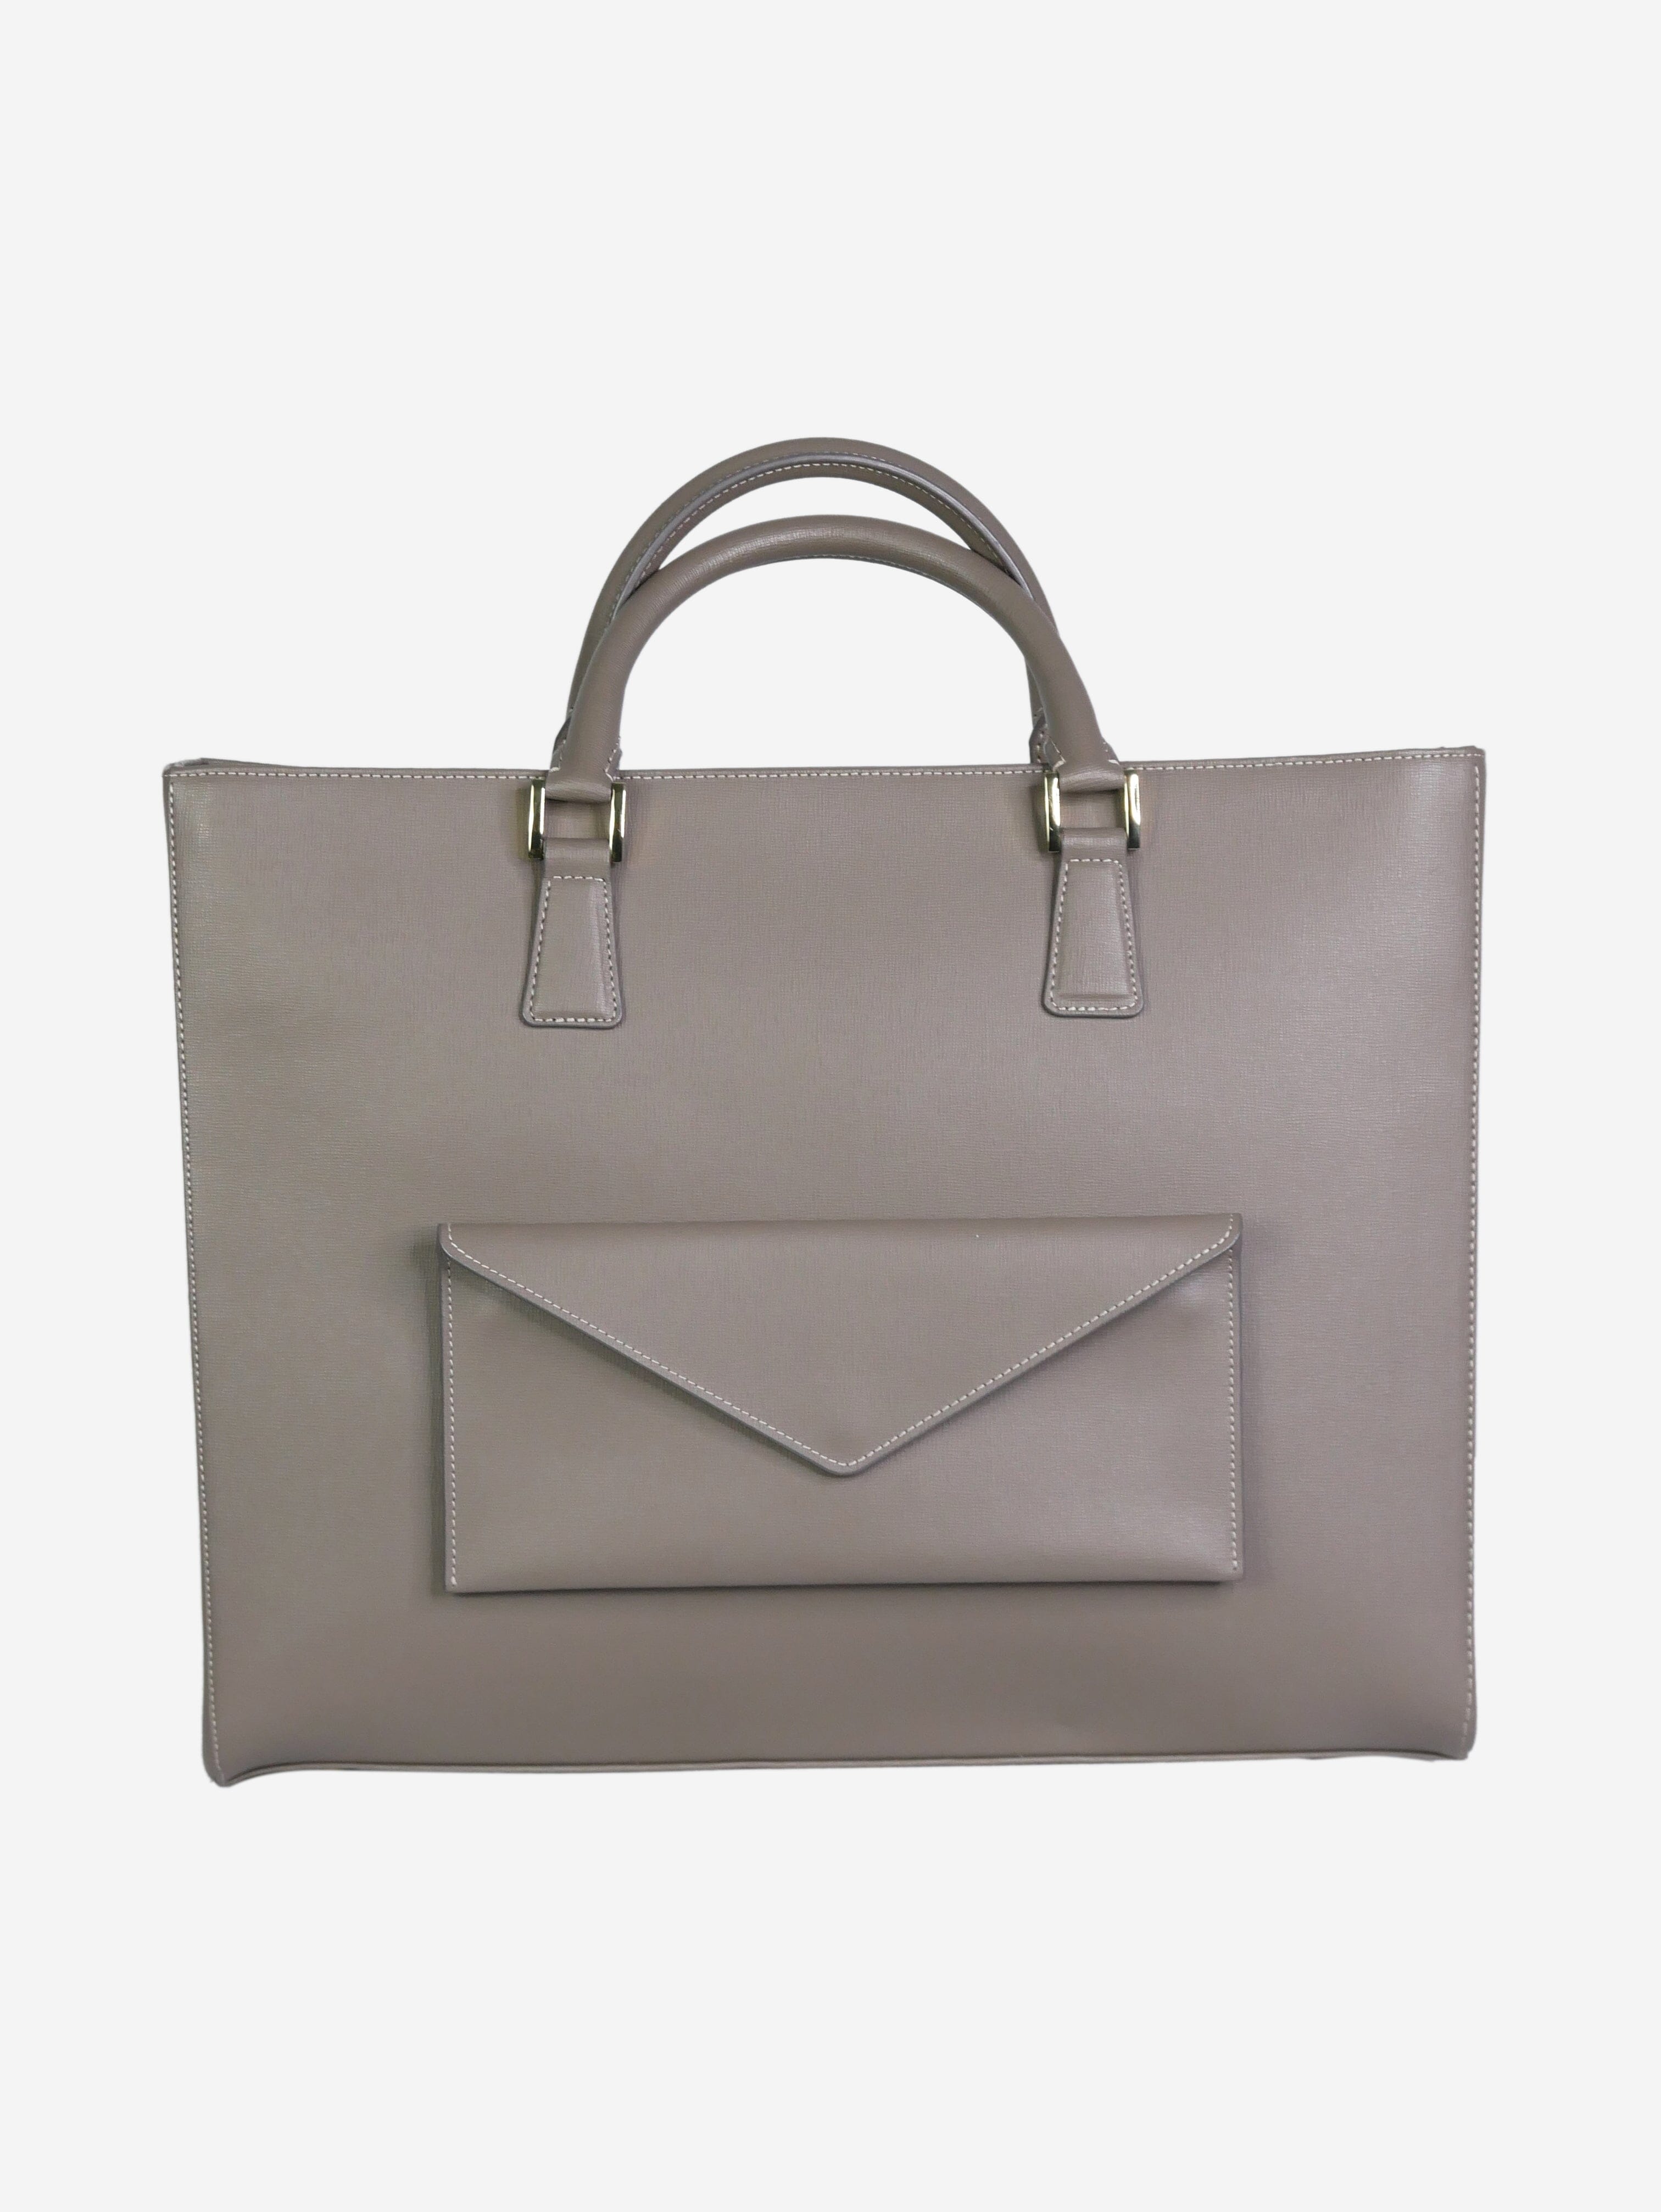 Fourre Tout Pm - For Sale on 1stDibs  hermes fourre tout pm, fourre tout  hermes, tote bag fourre-tout